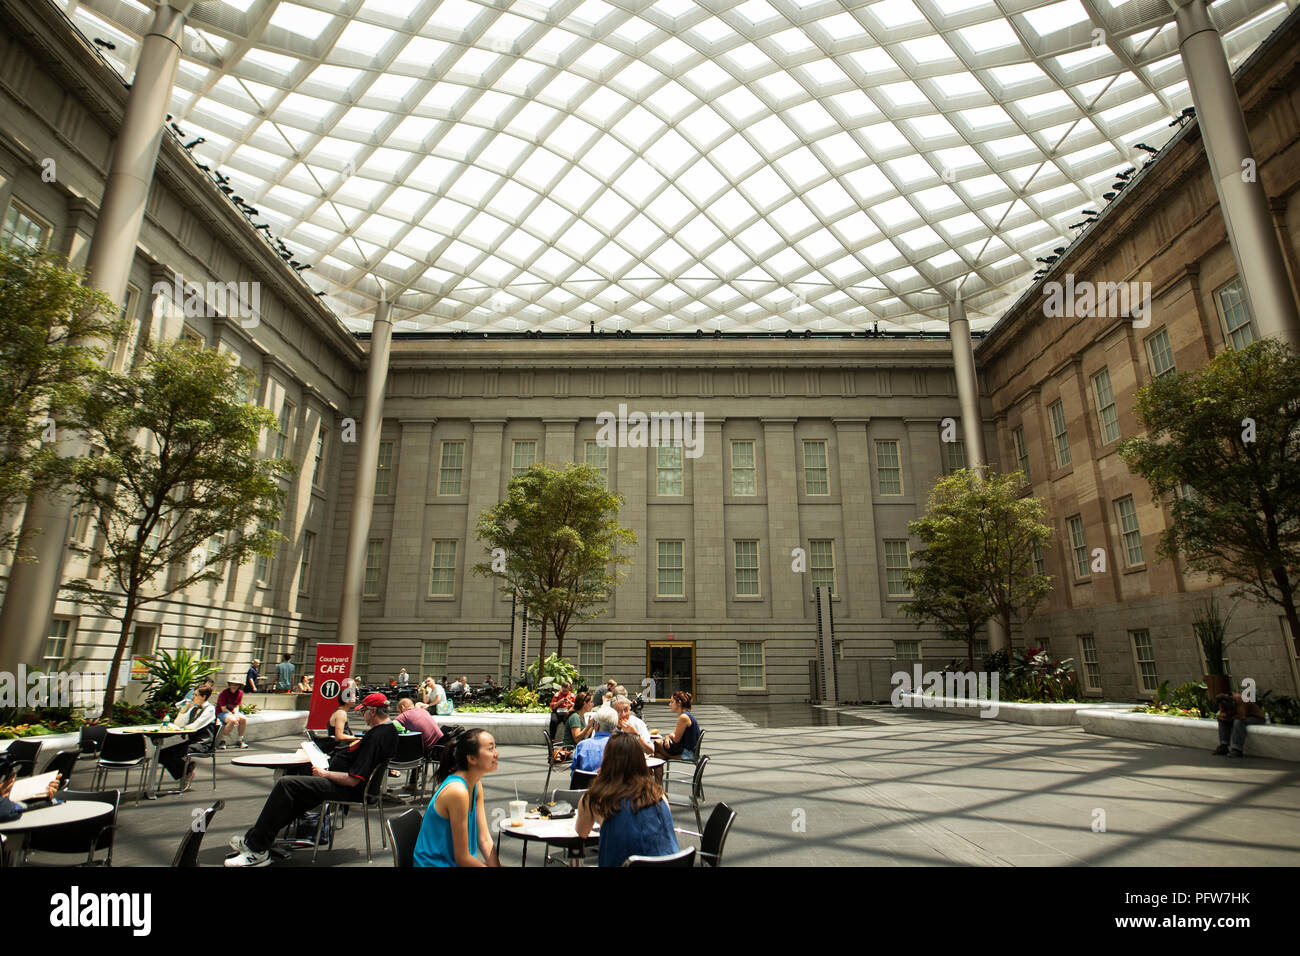 The atrium at the National Portrait Gallery in Washington, DC. Stock Photo